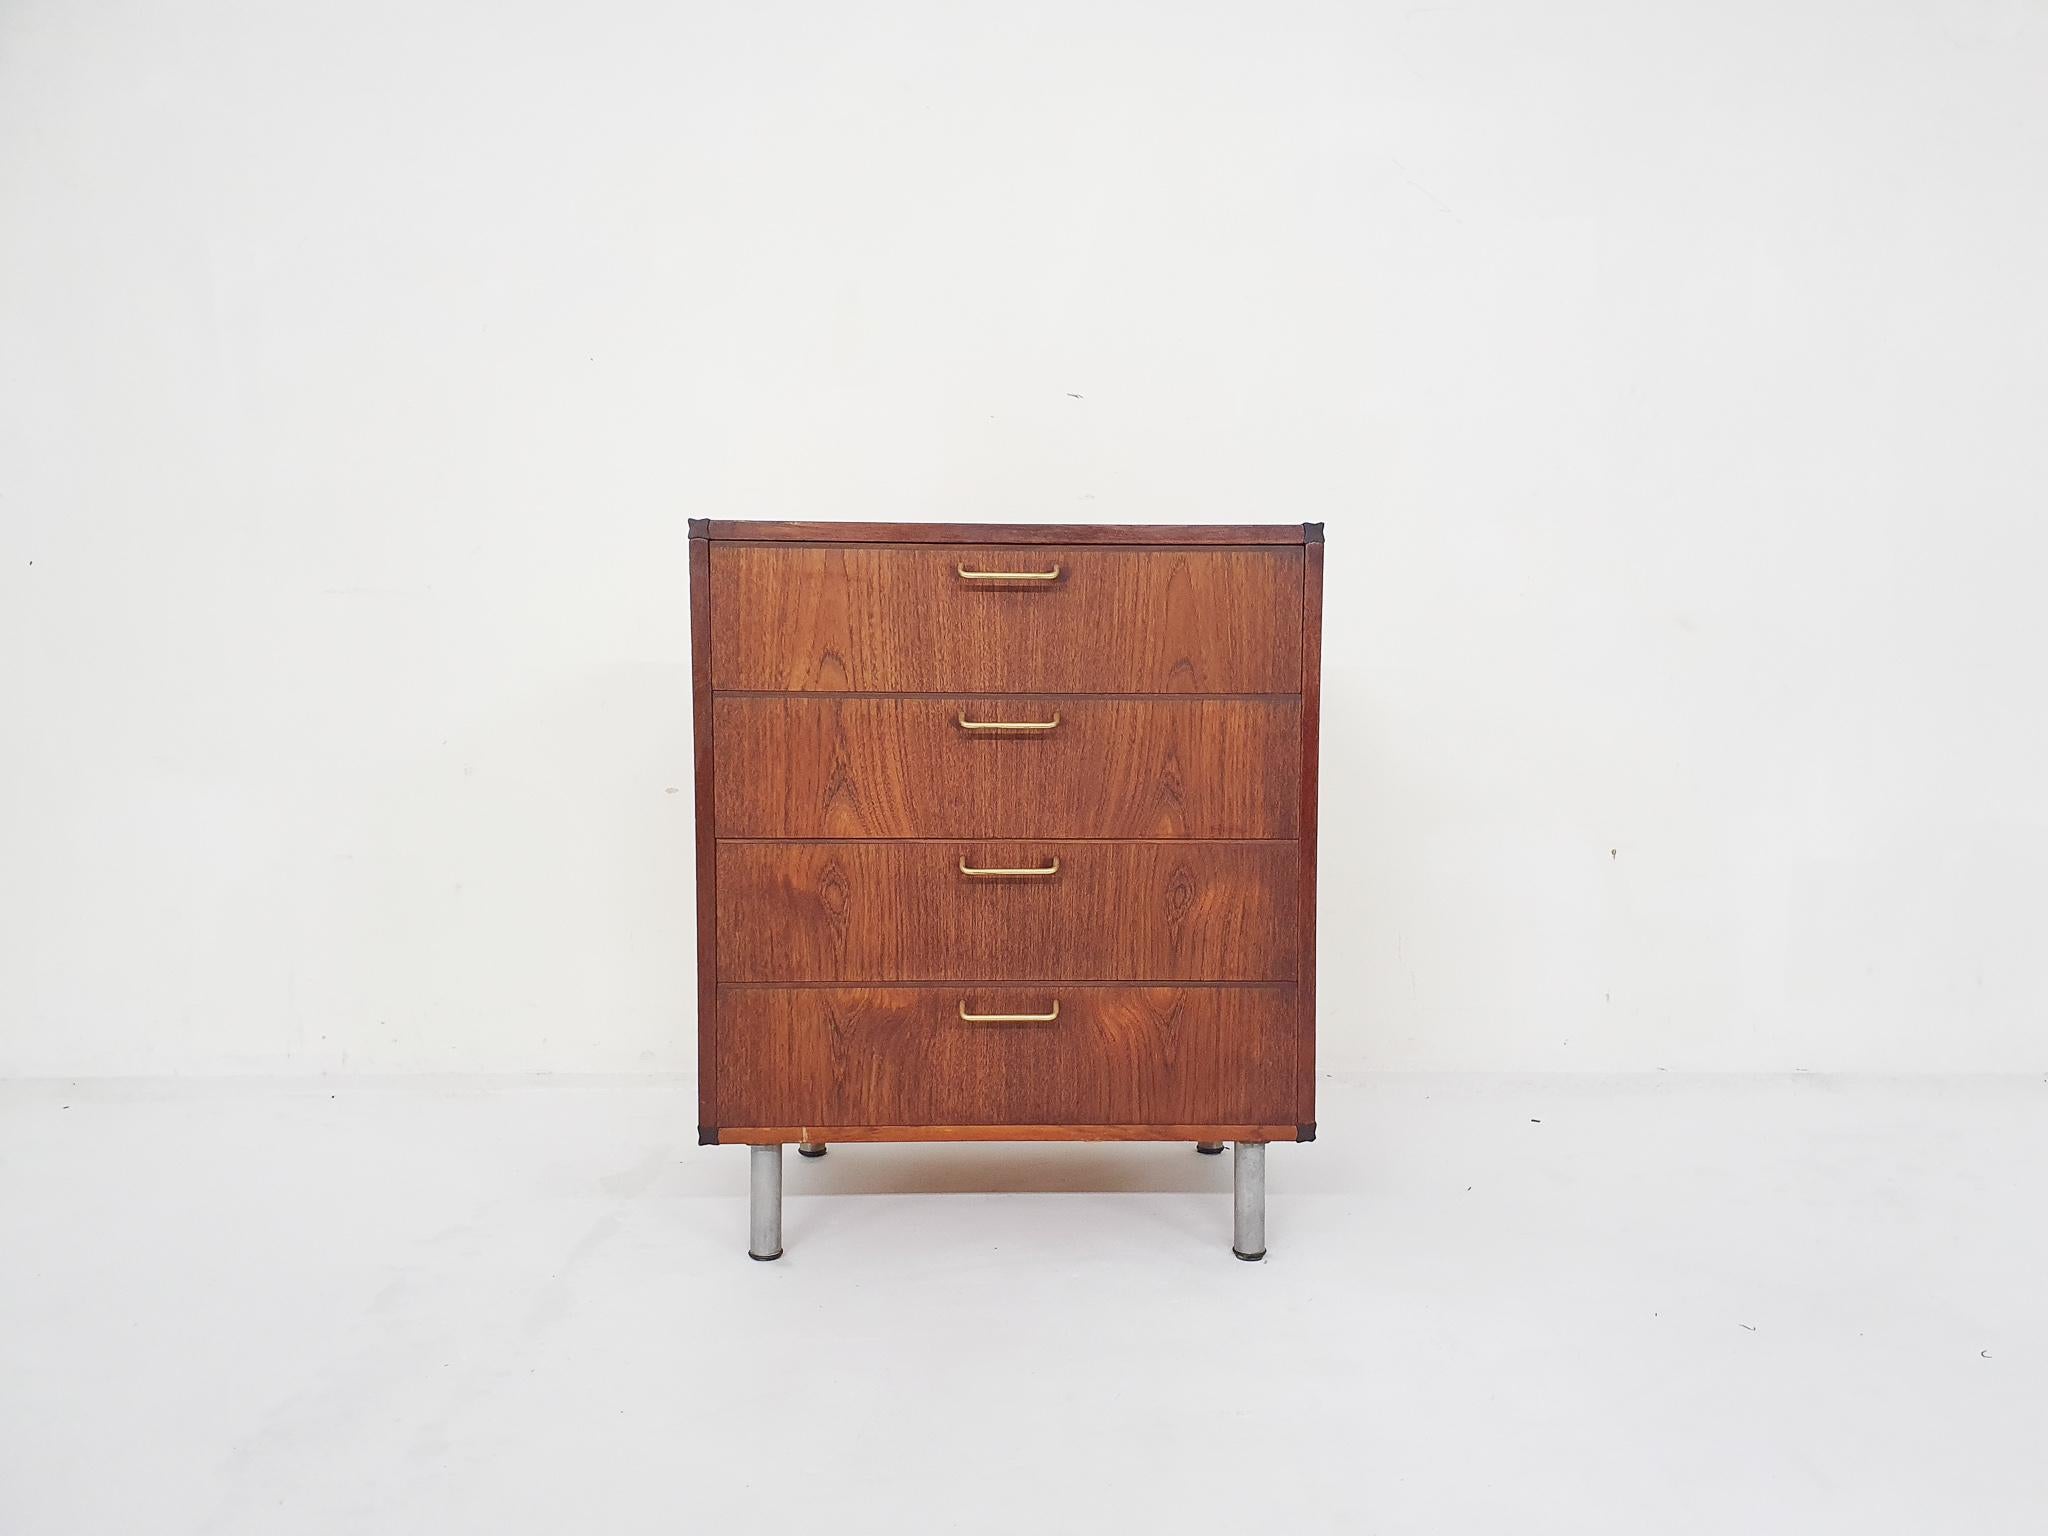 Chest of drawers designed by Cees Braakman for Pastoe in The Netherladns in the 1950s. The model ET62 comes from the 